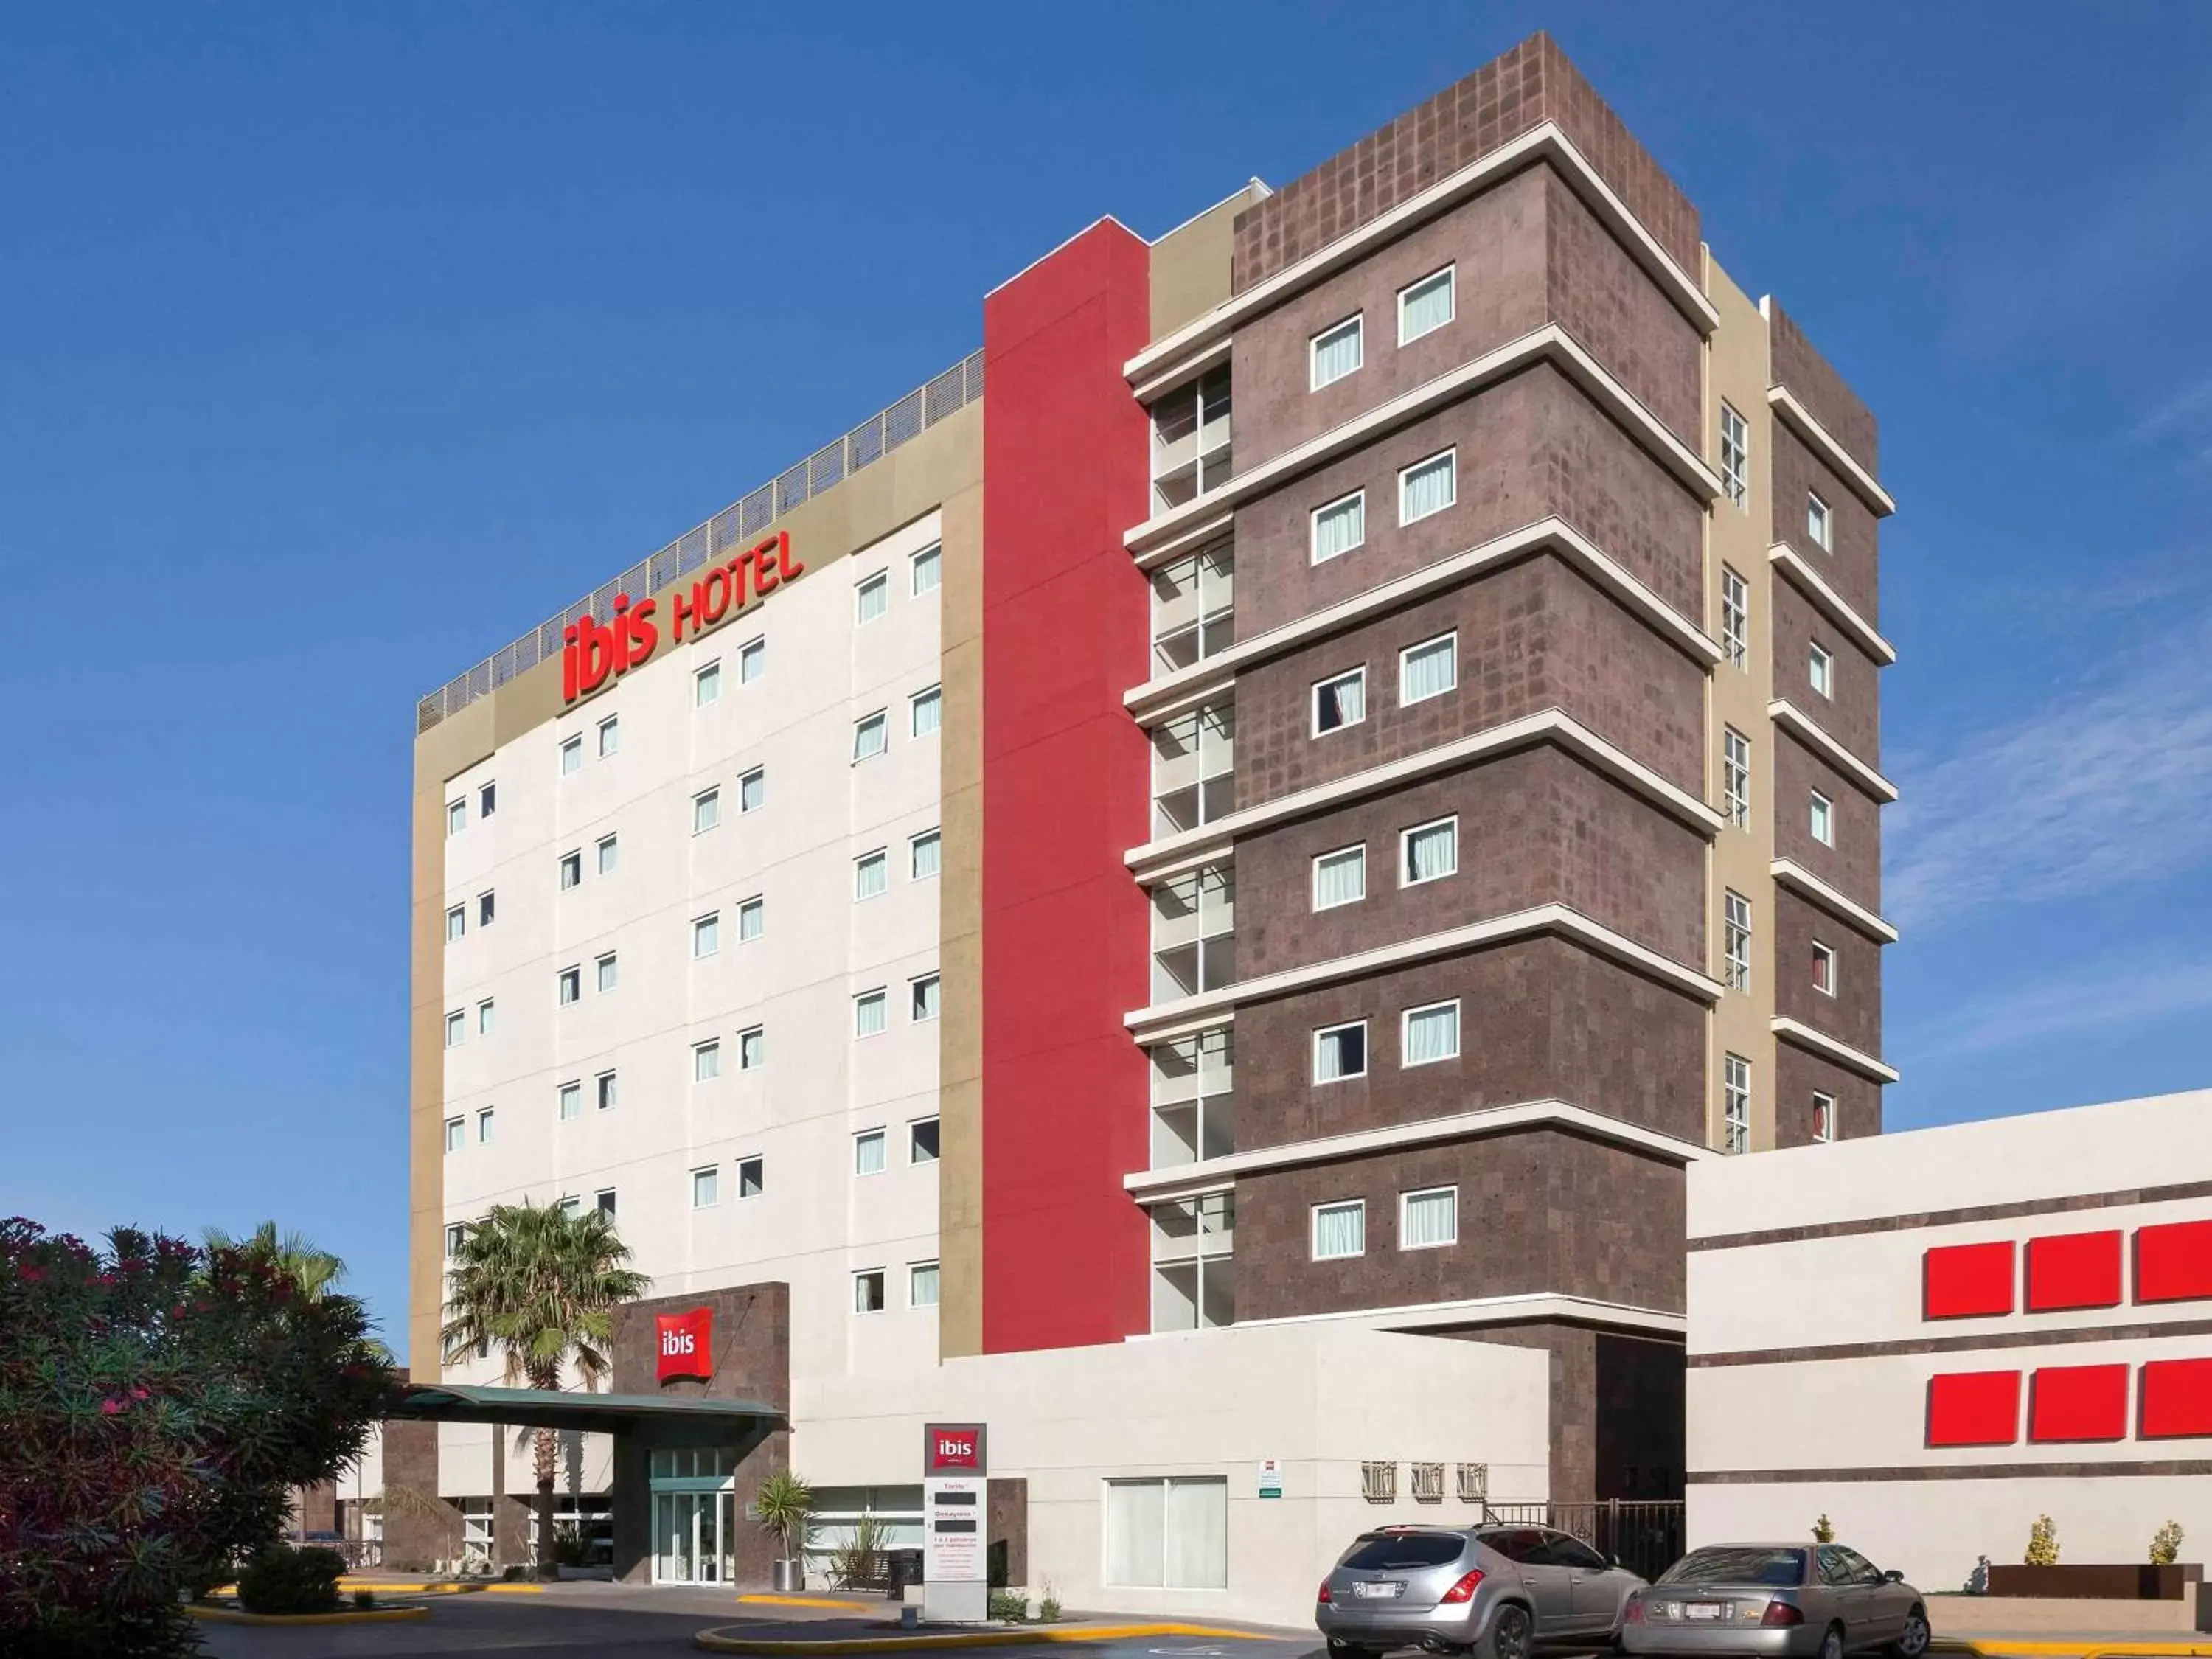 Property Building in Ibis Chihuahua